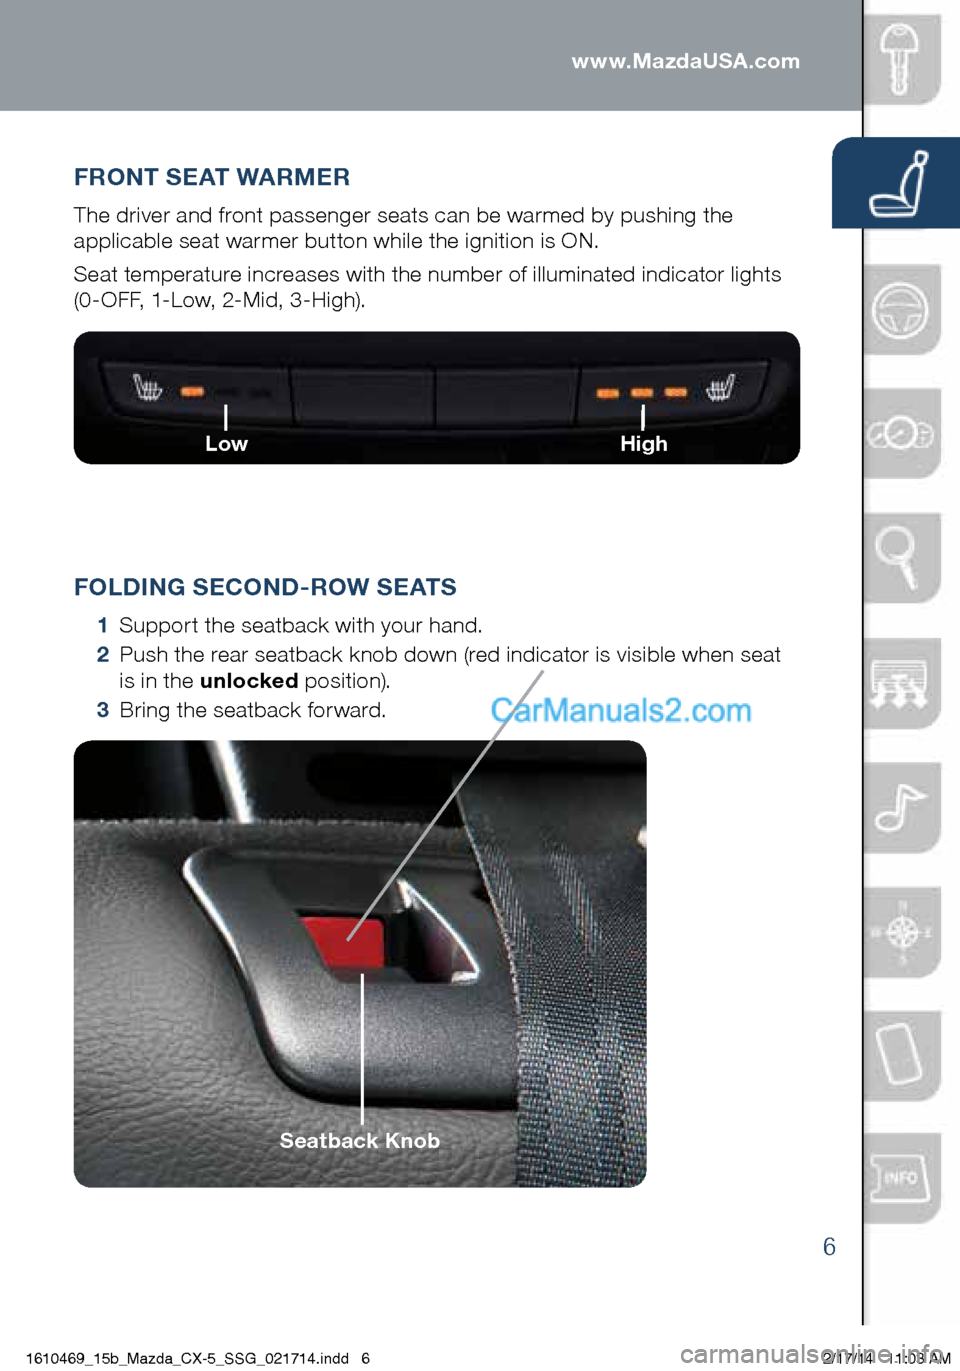 MAZDA MODEL CX-5 2015  Smart Start Guide (in English) FRONT SEAT WARMER
The driver and front passenger seats can be warmed by pushing the 
applicable seat warmer button while the ignition is ON.
Seat temperature increases with the number of illuminated i